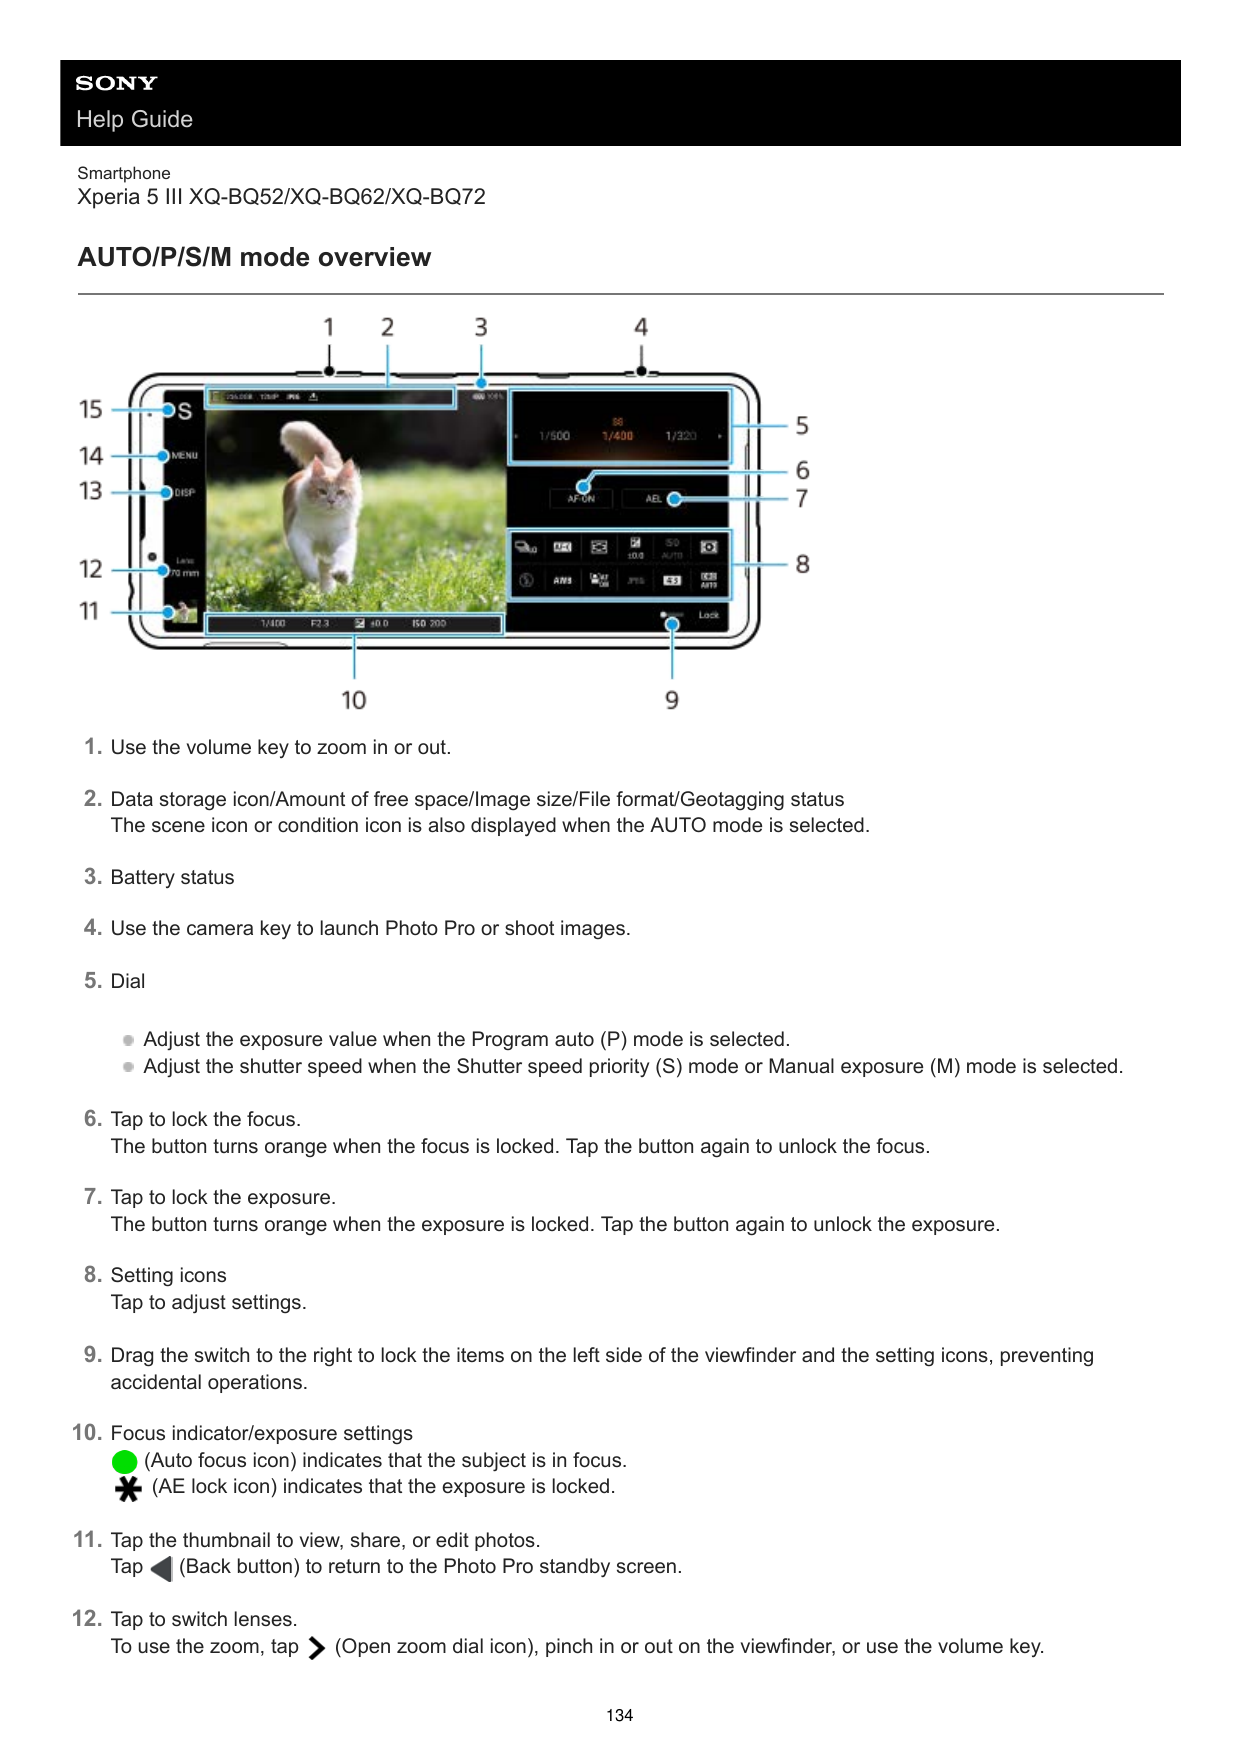 Help GuideSmartphoneXperia 5 III XQ-BQ52/XQ-BQ62/XQ-BQ72AUTO/P/S/M mode overview1. Use the volume key to zoom in or out.2. Data 